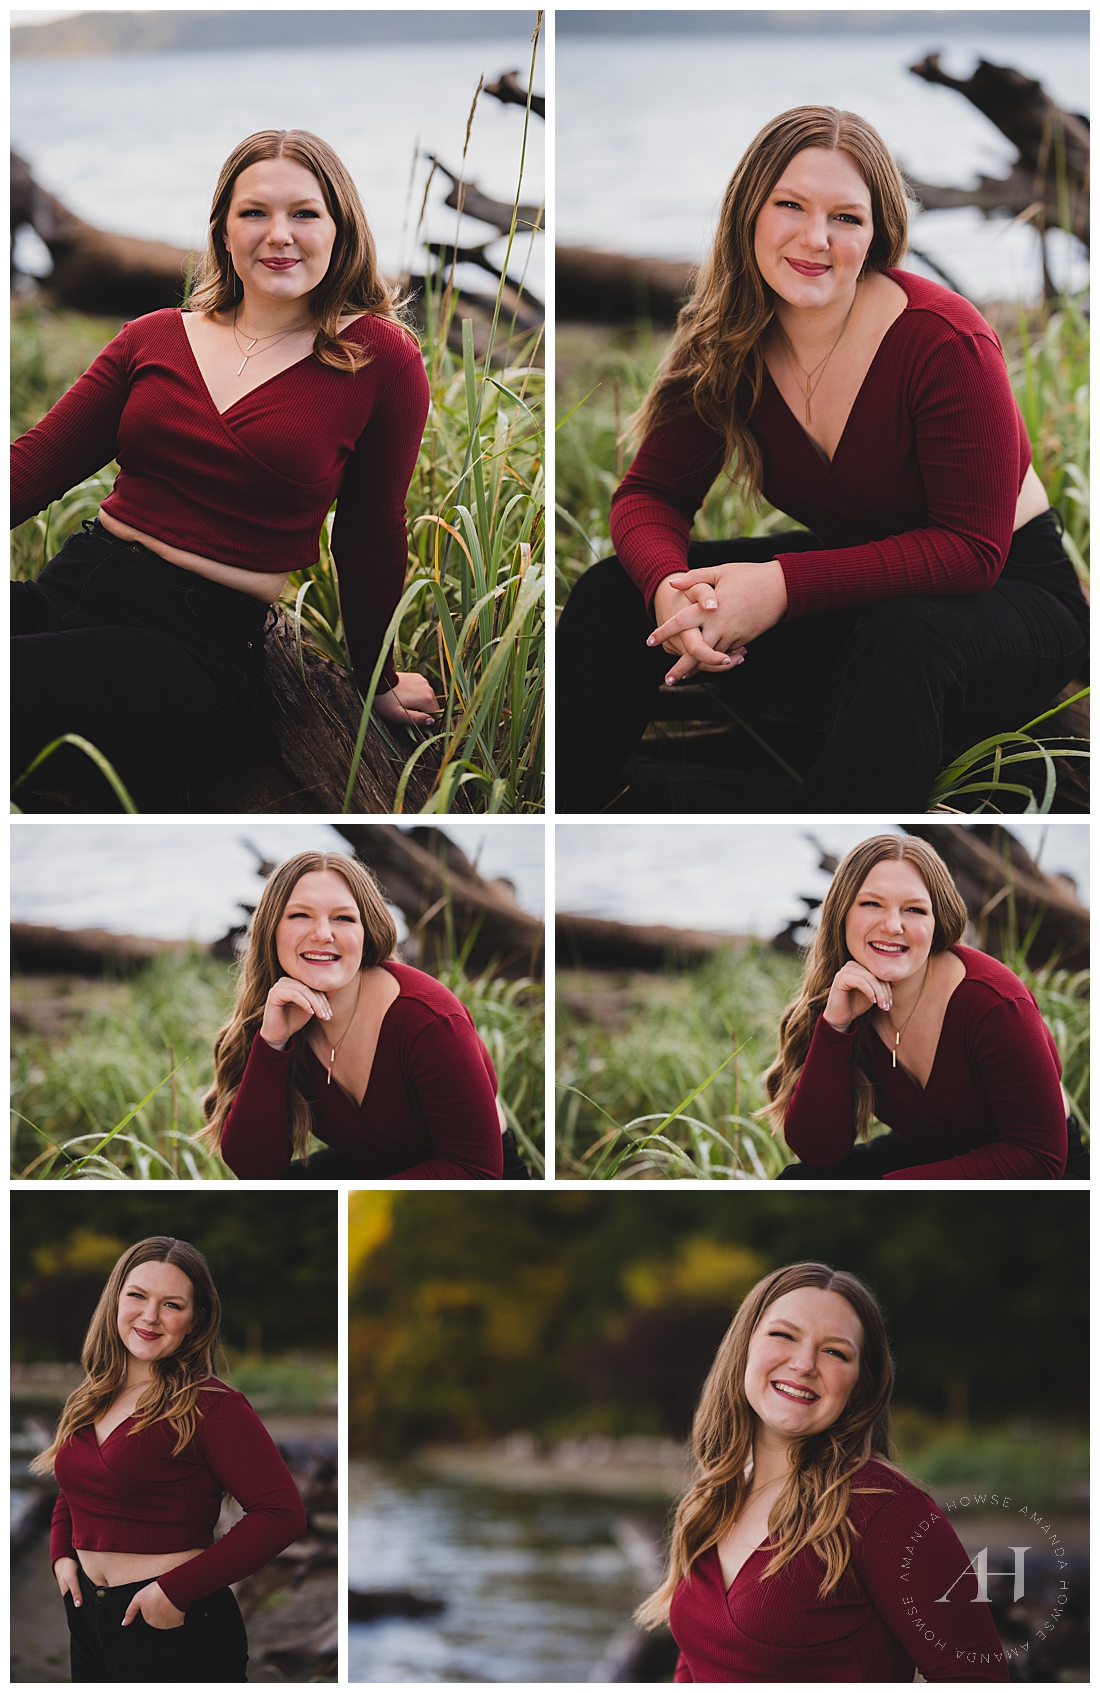 Early October Photoshoot by Ocean | Waterfront Senior Pictures, Maroon Long-Sleeve with Cute Black Jeans | Photographed by the Best Tacoma Senior Photographer Amanda Howse Photography